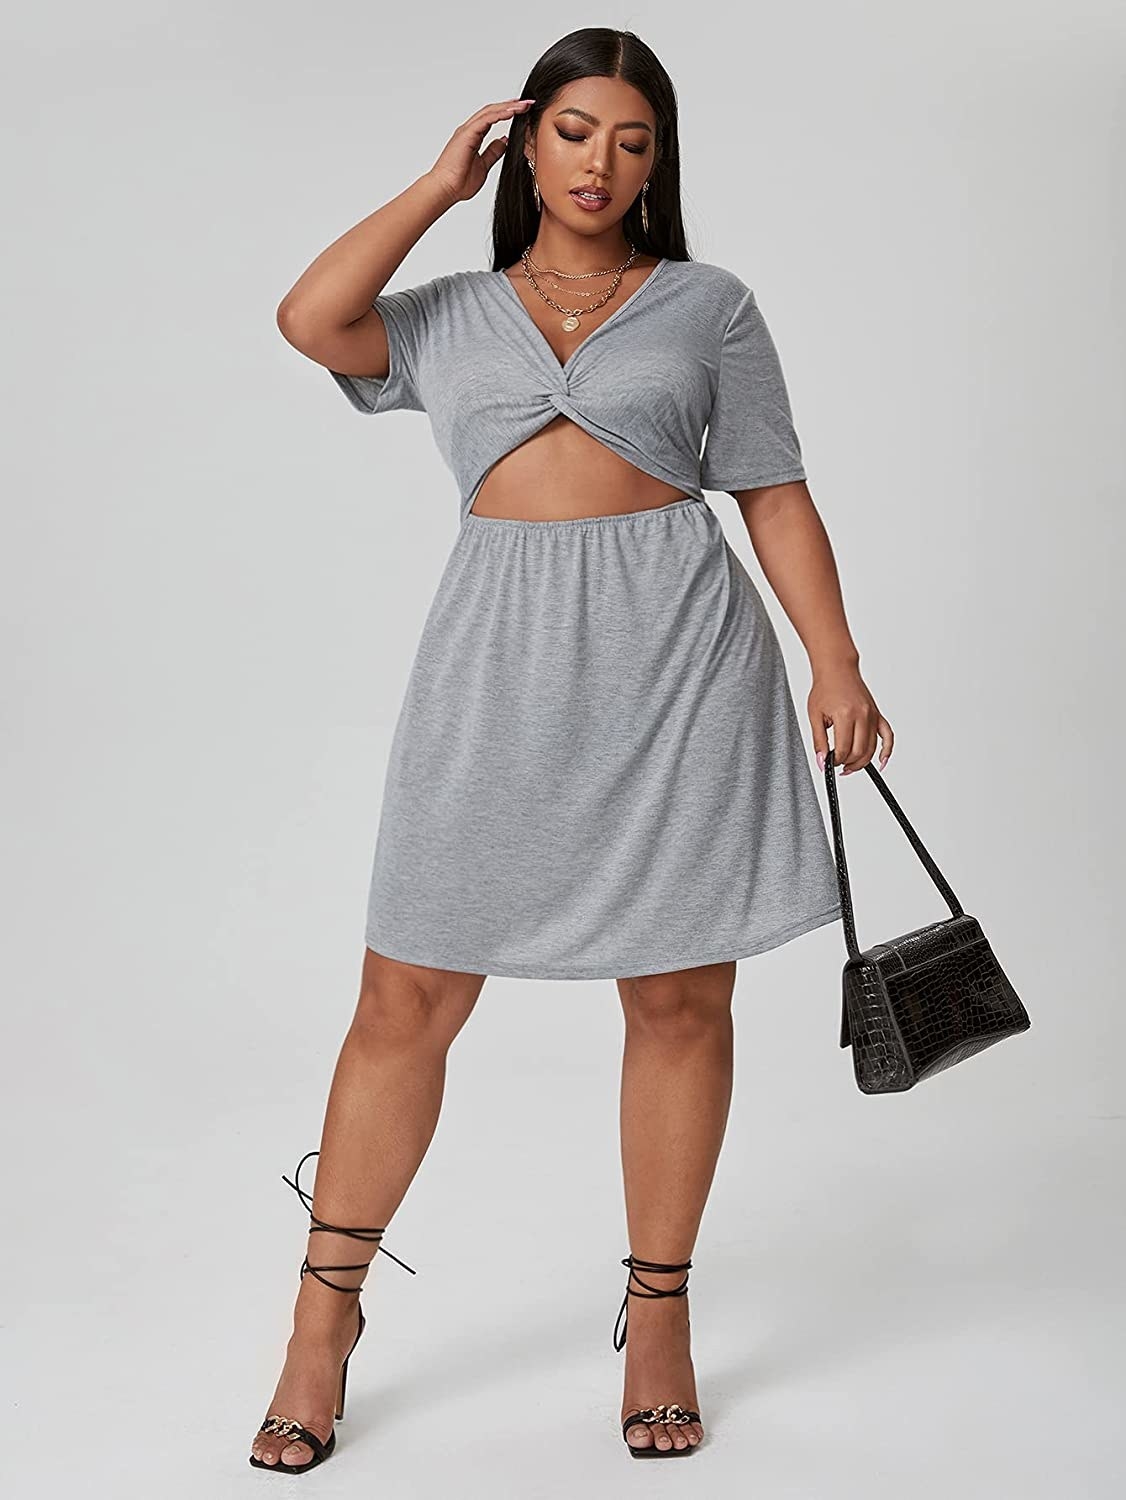 a plus size model wearing the grey Short Sleeve Cutout Twist Front V Neck Summer A Line Skater Dress